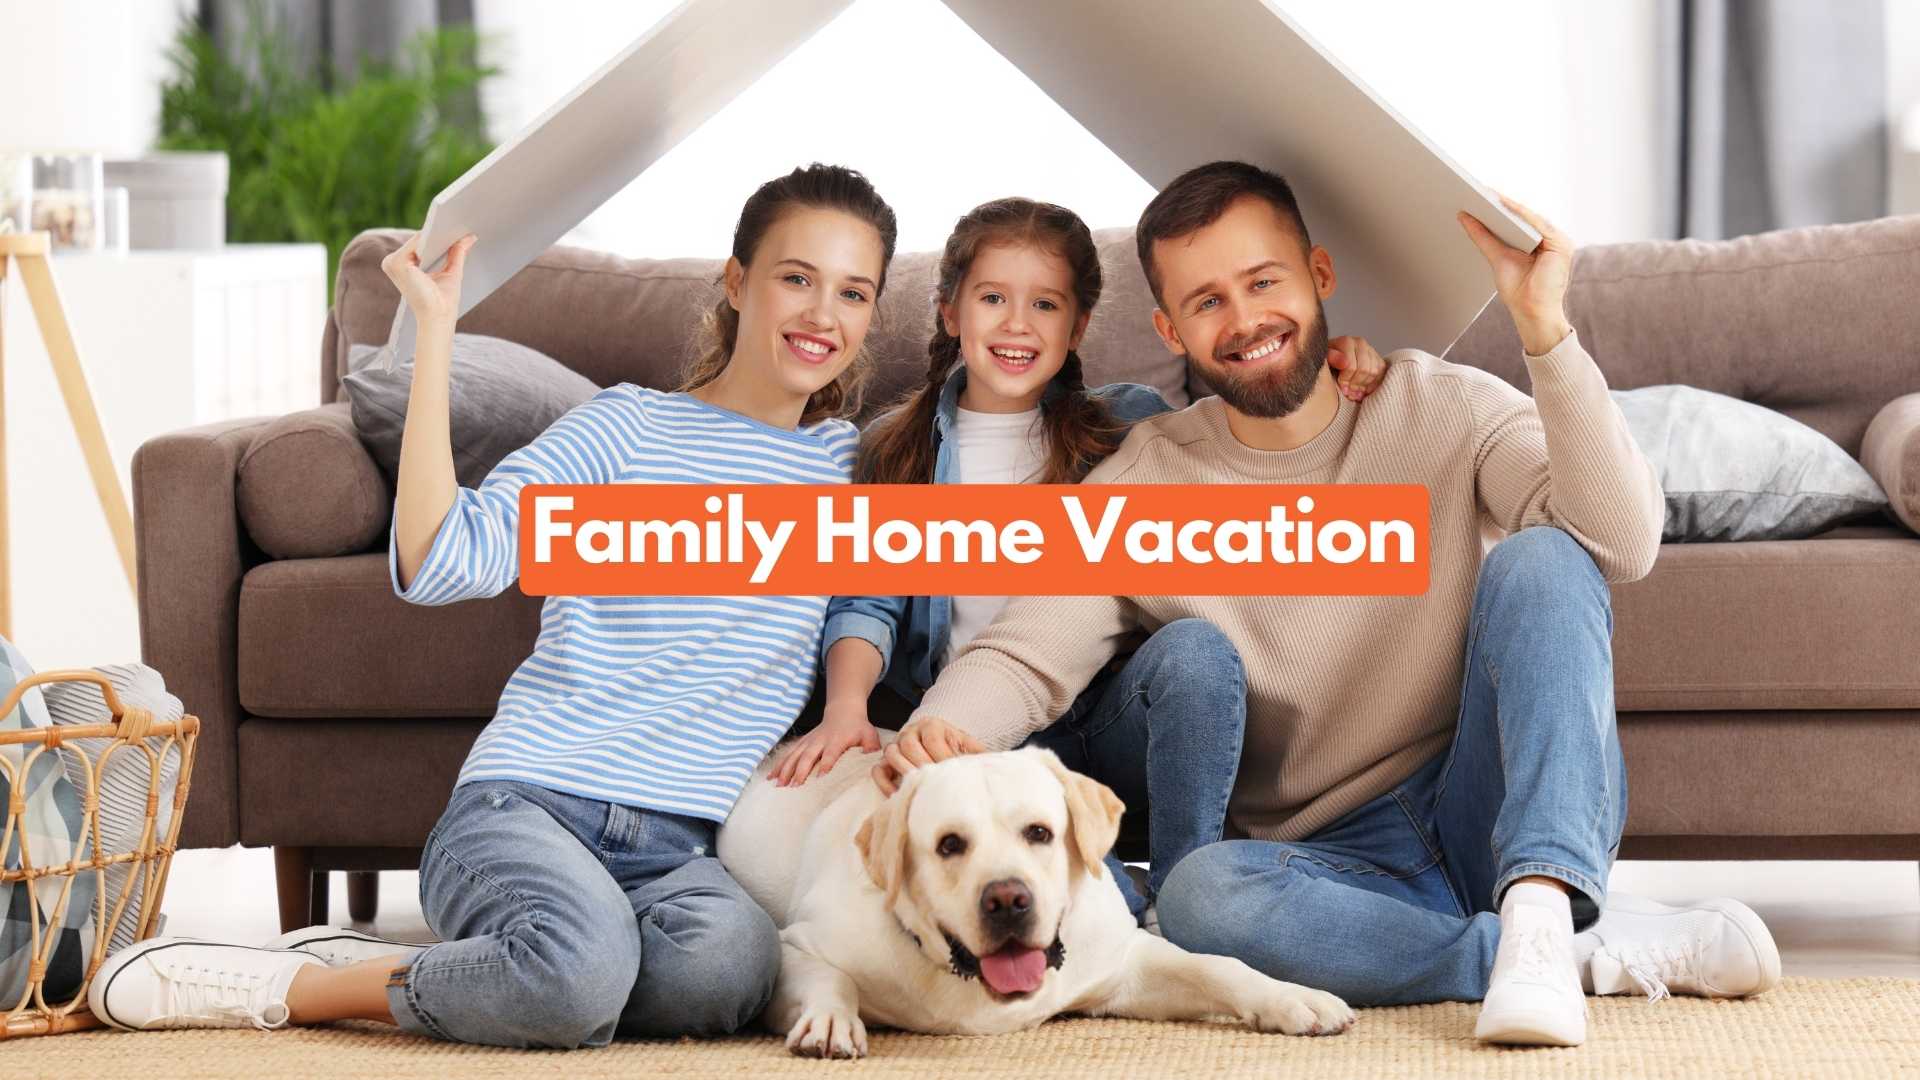 Family Home Vacation